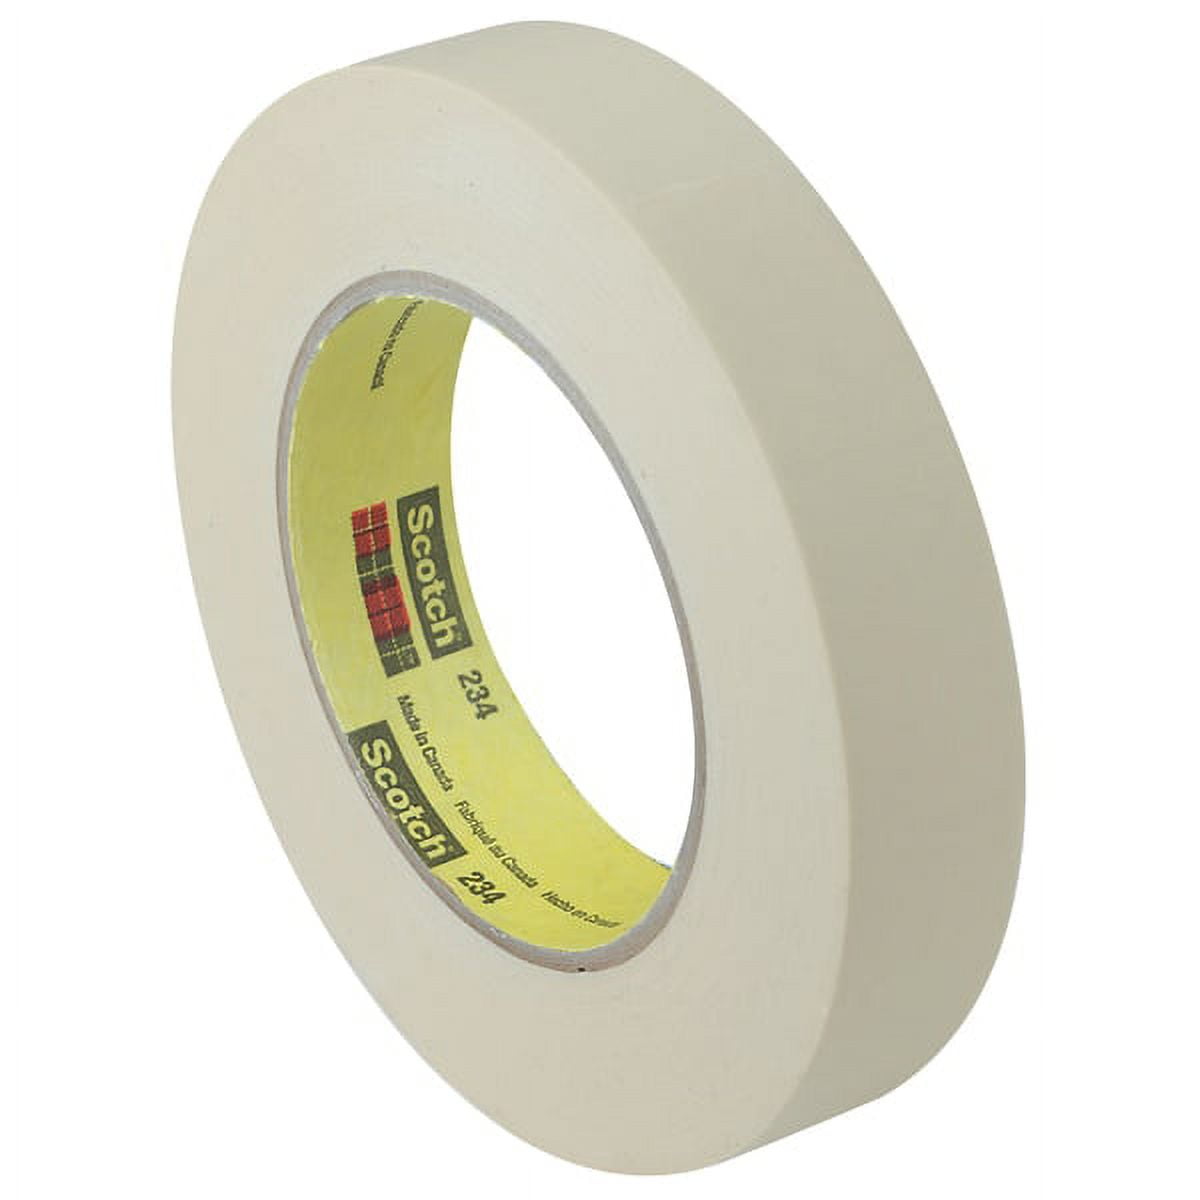 Scotch T93623412pk 1.50 In. X 60 Yards 234 Masking Tape, Tan - Pack Of 12